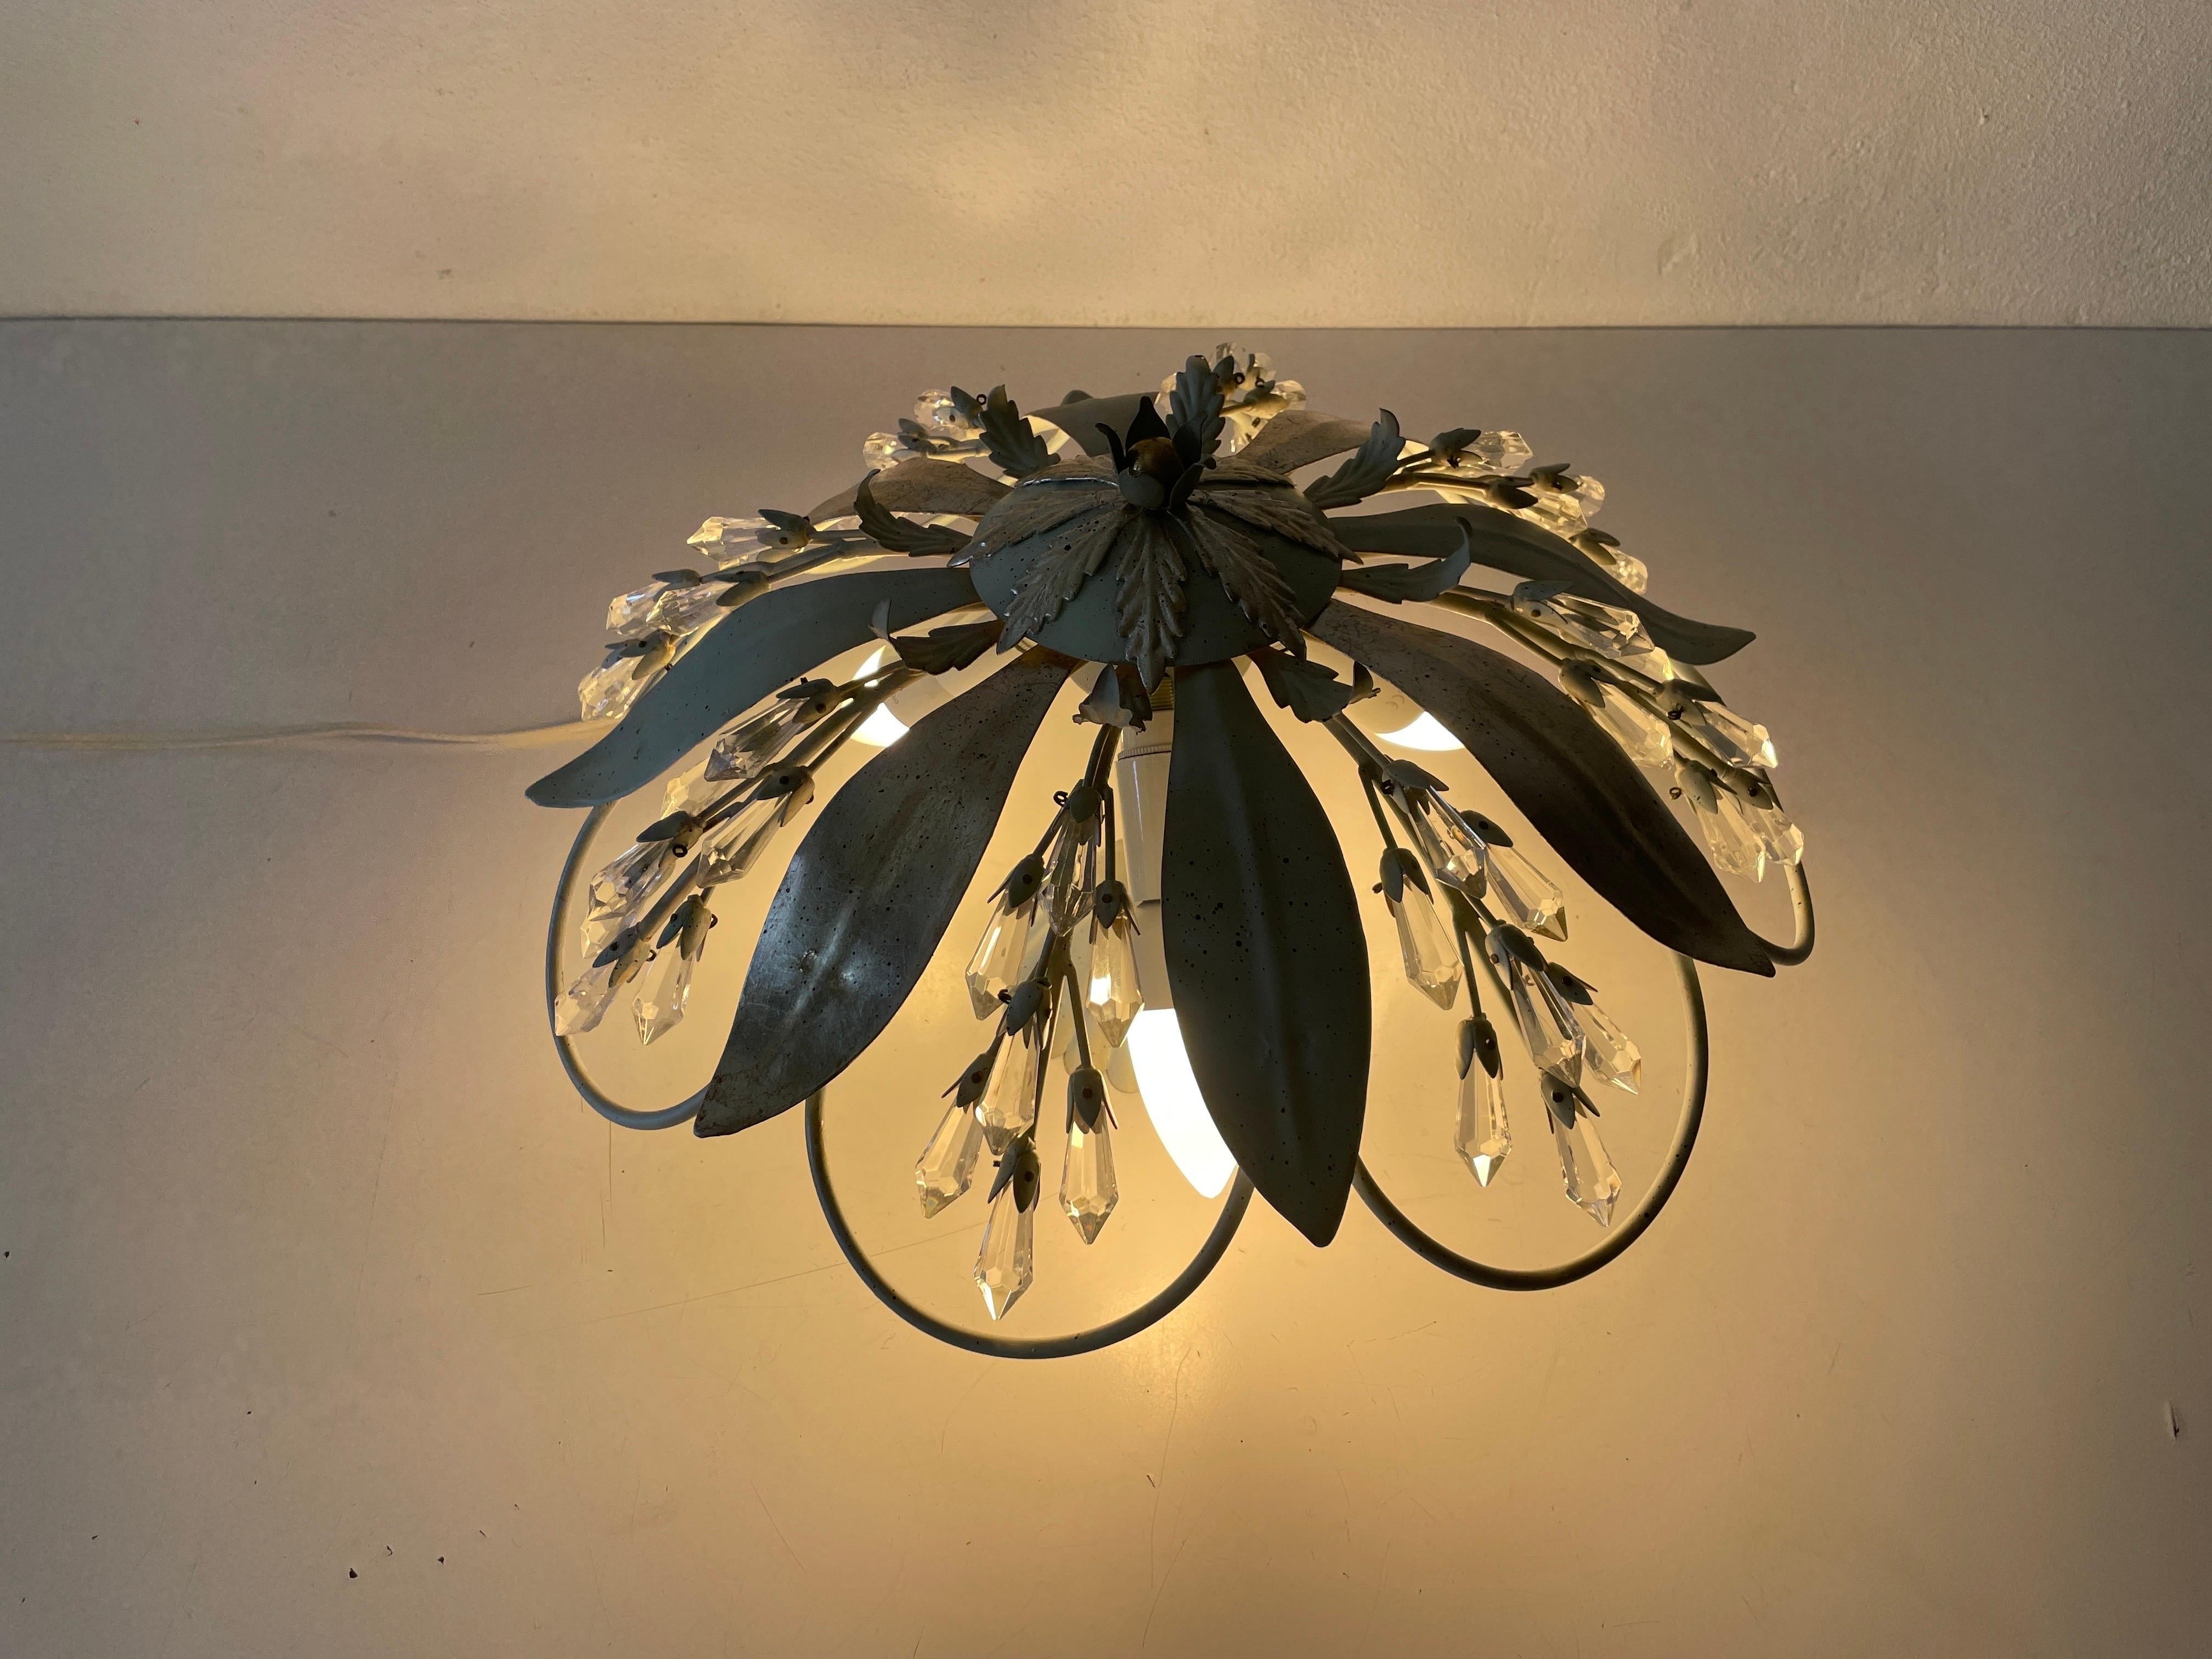 Flower Design Ceiling Lamp with Glass Ornaments, 1950s, Germany For Sale 8